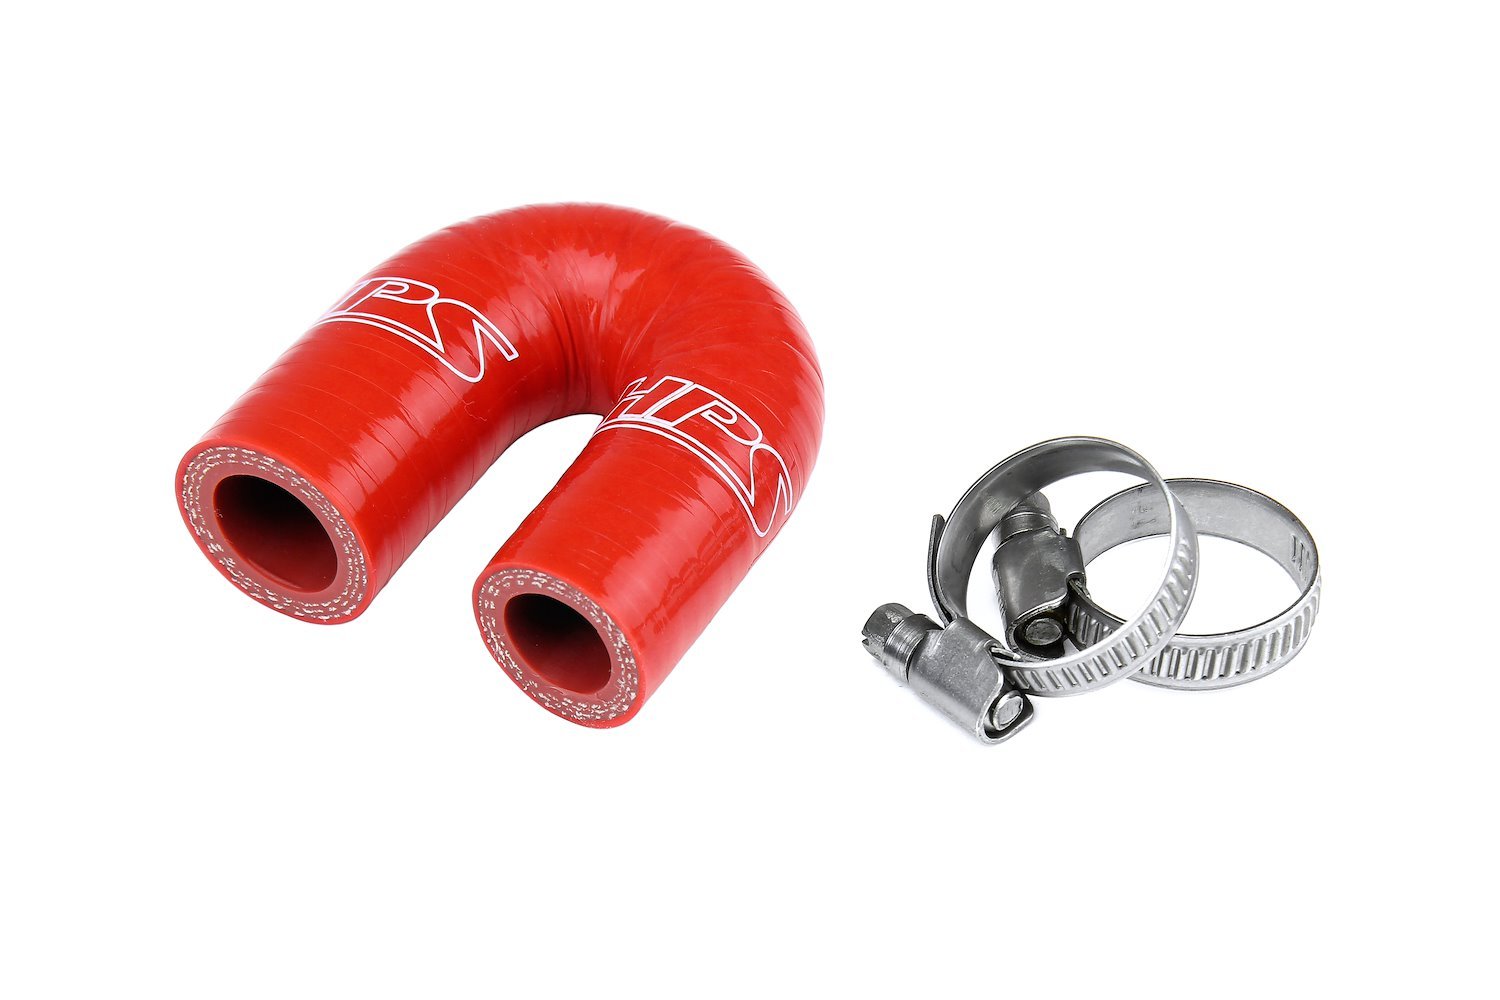 57-1864-RED Heater Bypass Hose Kit, 4-Ply Reinforced Silicone Loop To Bypass Cabin Heater